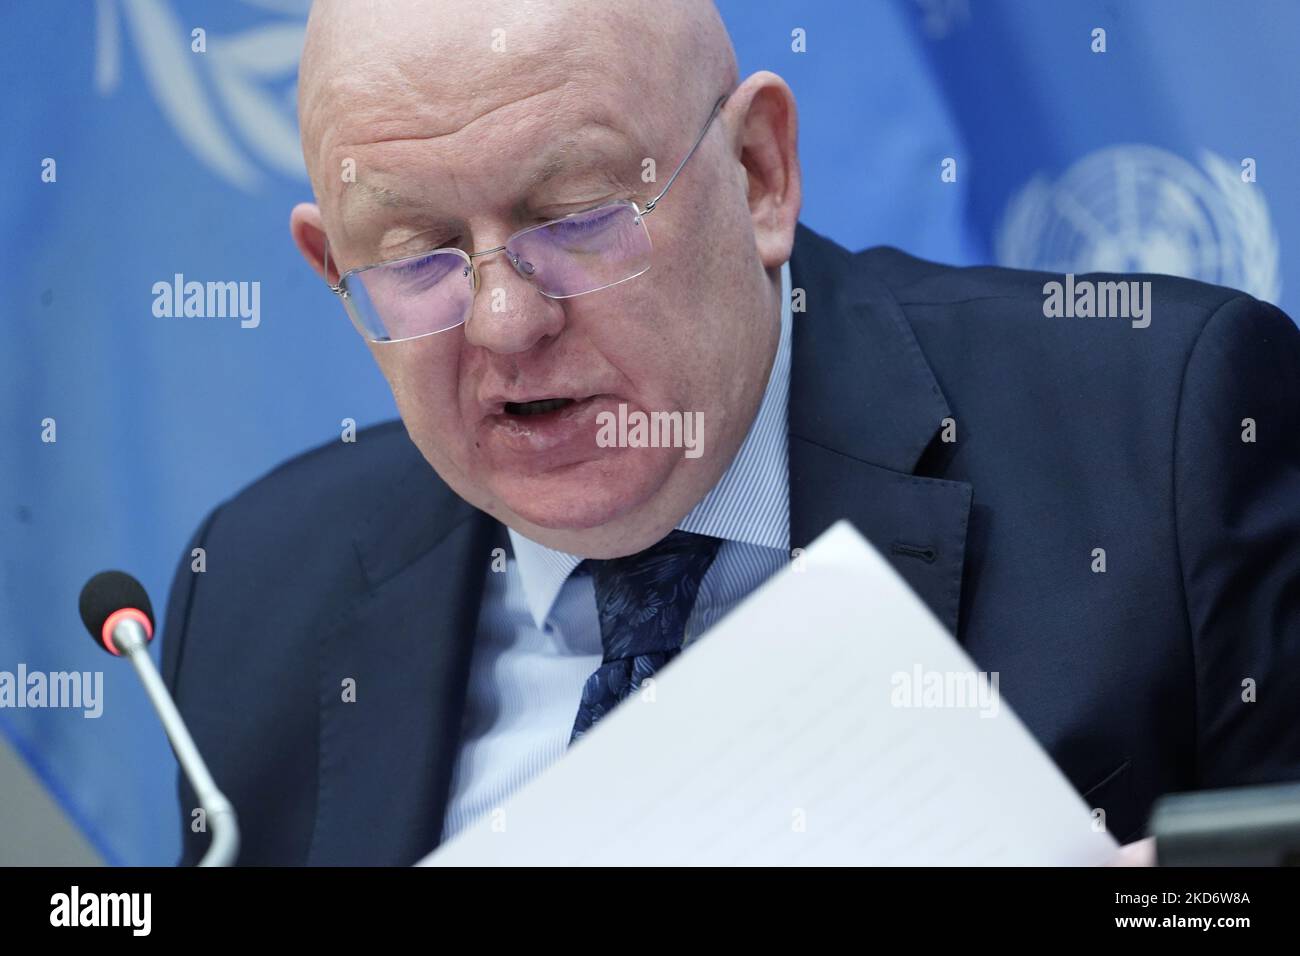 Ambassador Vassily Nebenzia, permanent representative of the Russian Federation to the United Nations speaks to the media at the United Nations Headquarters regarding supposed humanitarian atrocities perpetrated by the Russian military against the Ukrainian civilians, on April 4, 2022, in New York City, USA. As the Russian military continues to regroup and retreat form the northern region of Ukraine, outrage begins to sweep across many parts of the world when a mass grave was discovered with hundredths of bodies in Bucha. The Russian Federation denies the charges citing that certain events wer Stock Photo